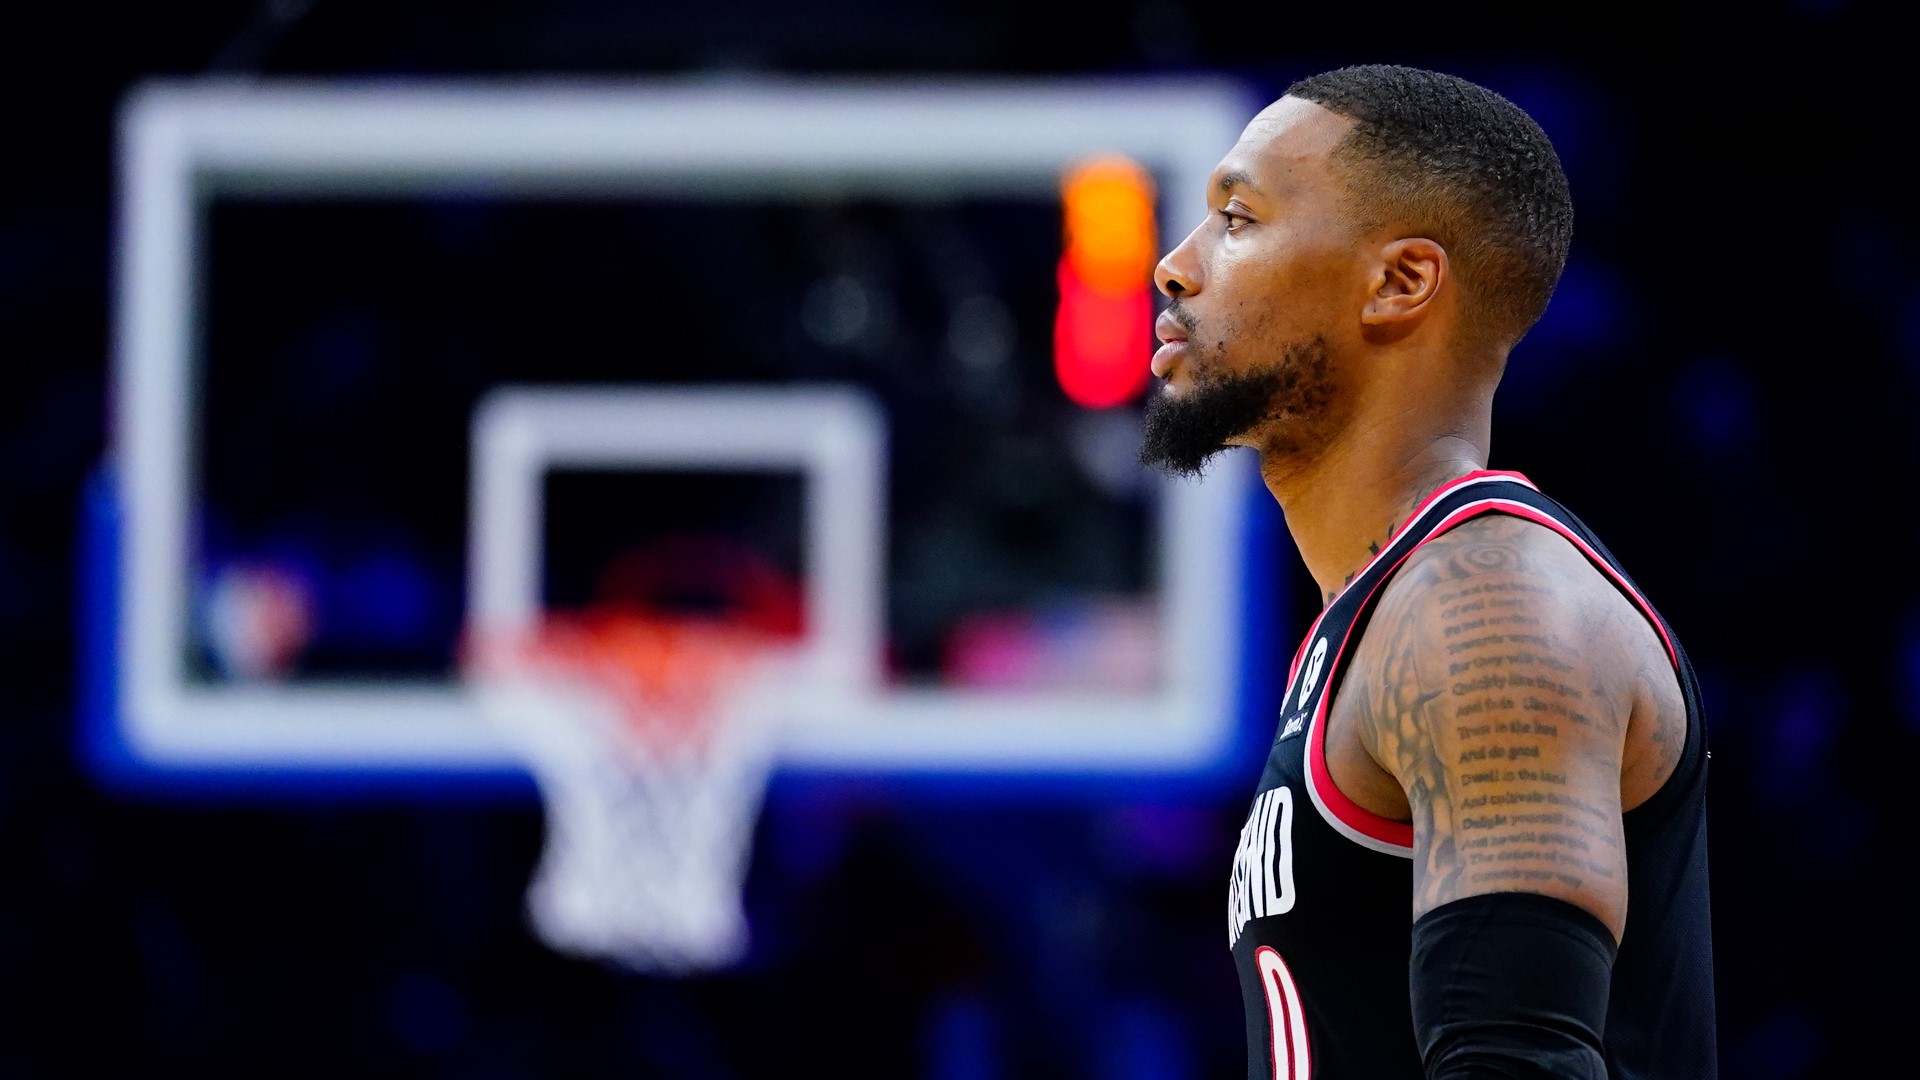 While much of the conversation centered around Damian Lillard, there was also discussion about Portland's new players, namely Scoot Henderson and Deandre Ayton.